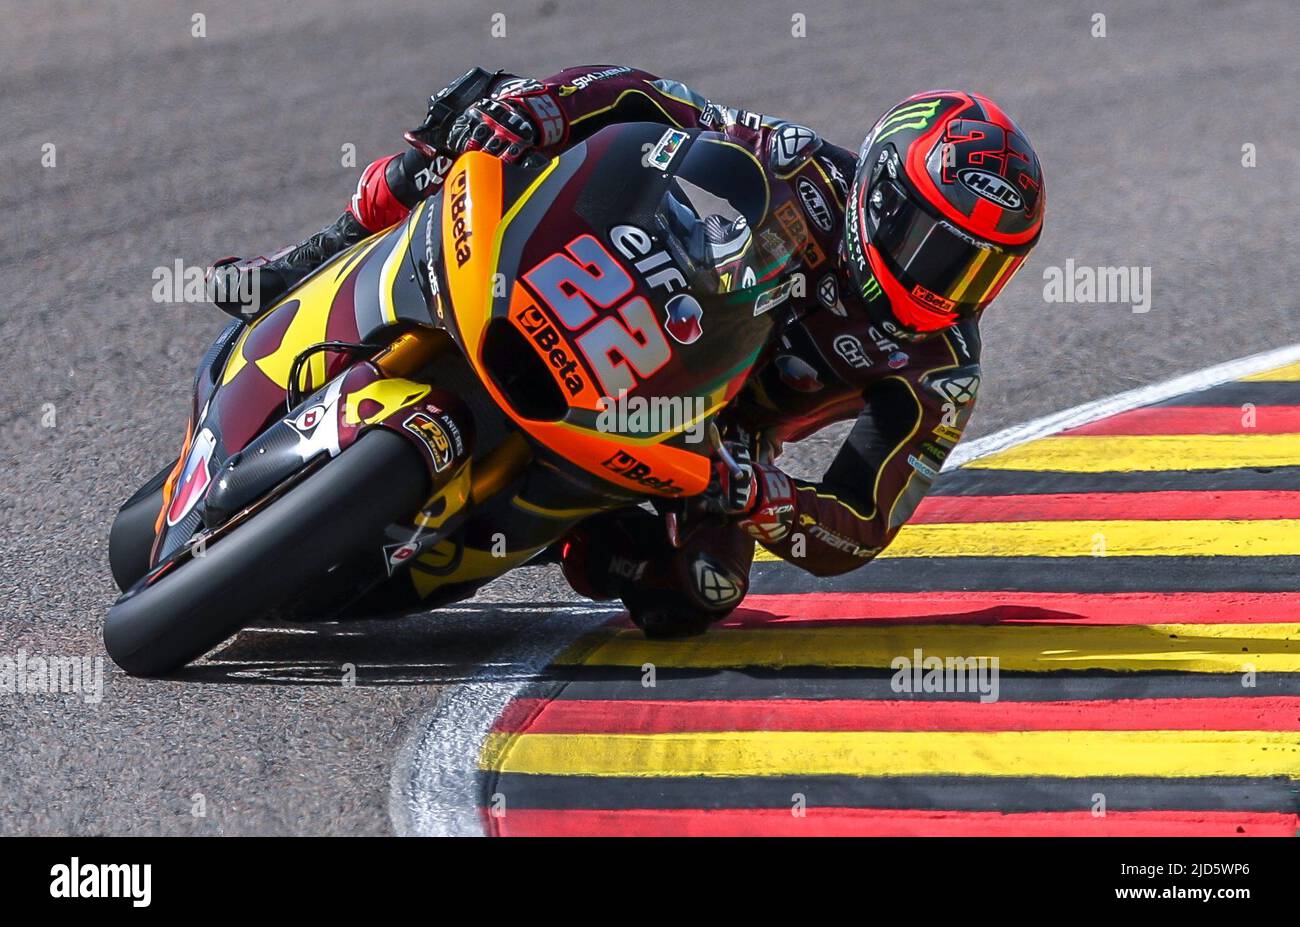 Hohenstein Ernstthal, Germany. 18th June, 2022. Motorsport/Motorcycle, German Grand Prix, Moto2, qualifying at the Sachsenring. Sam Lowes from Great Britain of the Elf Marc VDS Racing Team drives around the track. Credit: Jan Woitas/dpa/Alamy Live News Stock Photo